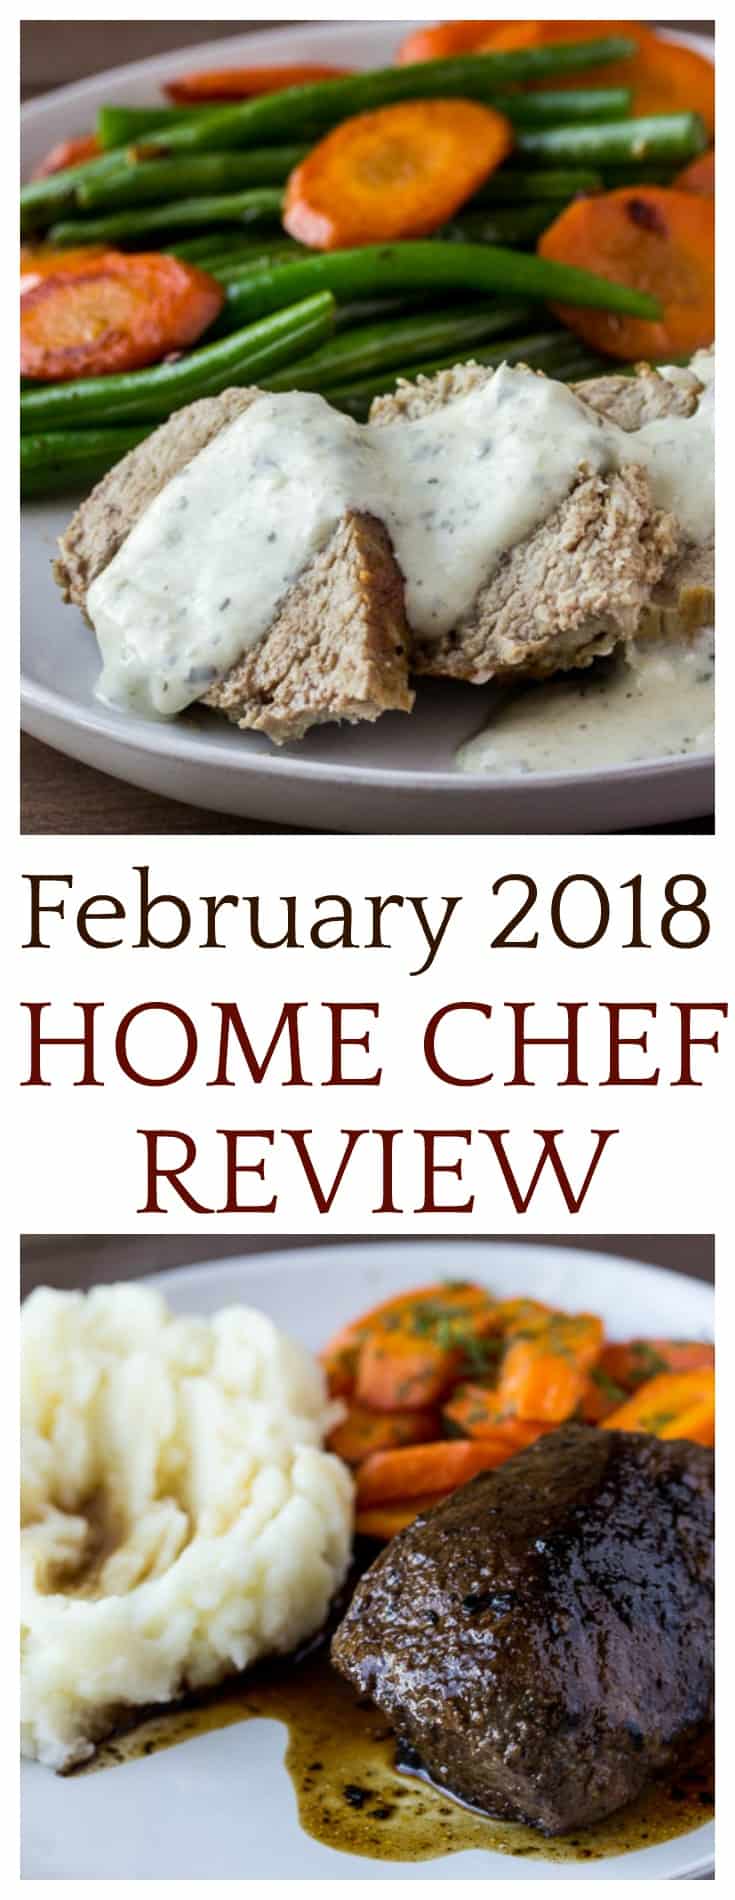 Check out the 4 meals and one smoothie in this February 2018 Home Chef review! It's my favorite meal kit subscription box so far! There is also a link to save $30 on your first order! | #homechef #homechefreview #subscriptionbox #mealkits